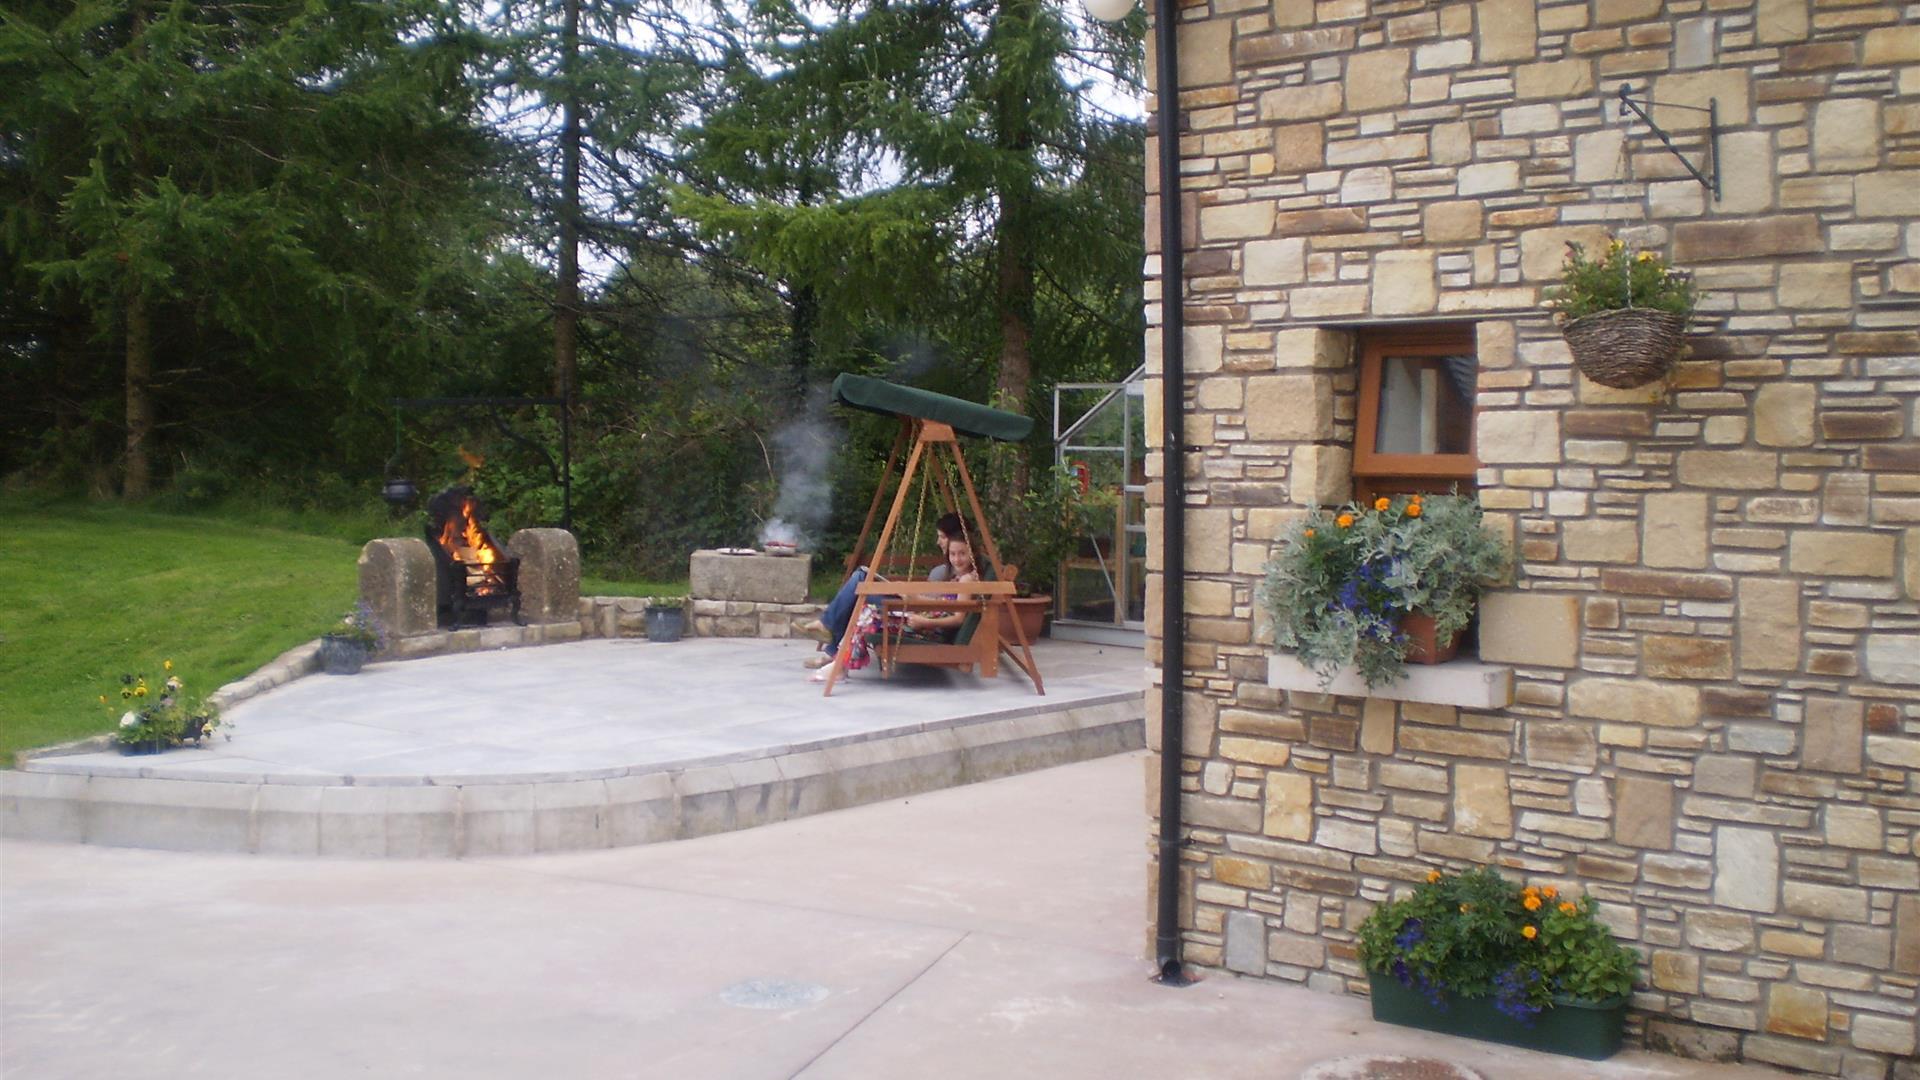 Outside patio area with firepit and wooden chair